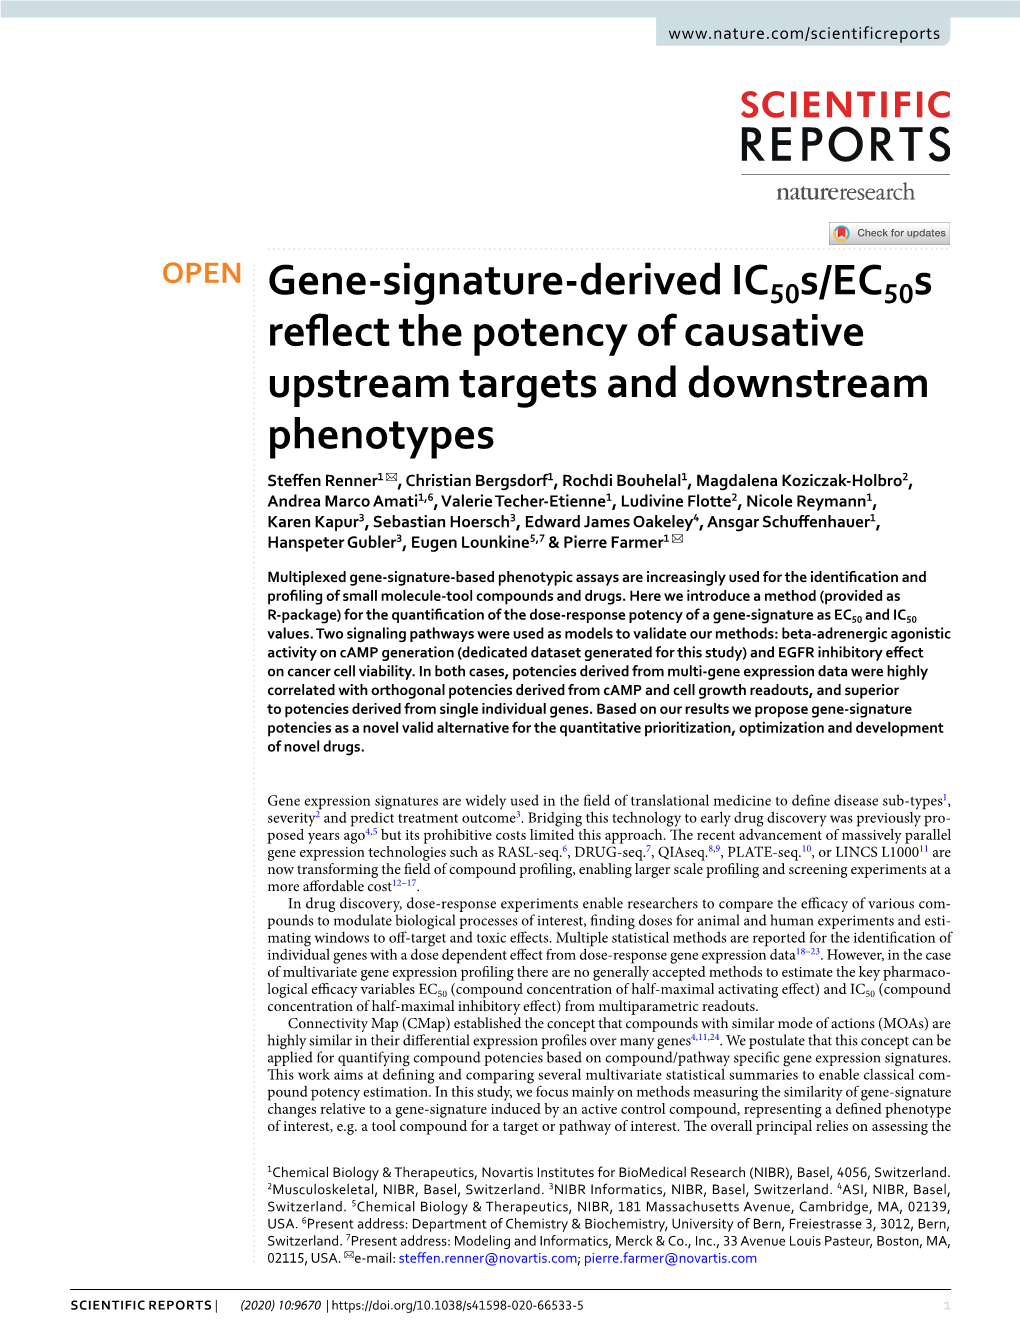 Gene-Signature-Derived Ic50s/Ec50s Reflect the Potency of Causative